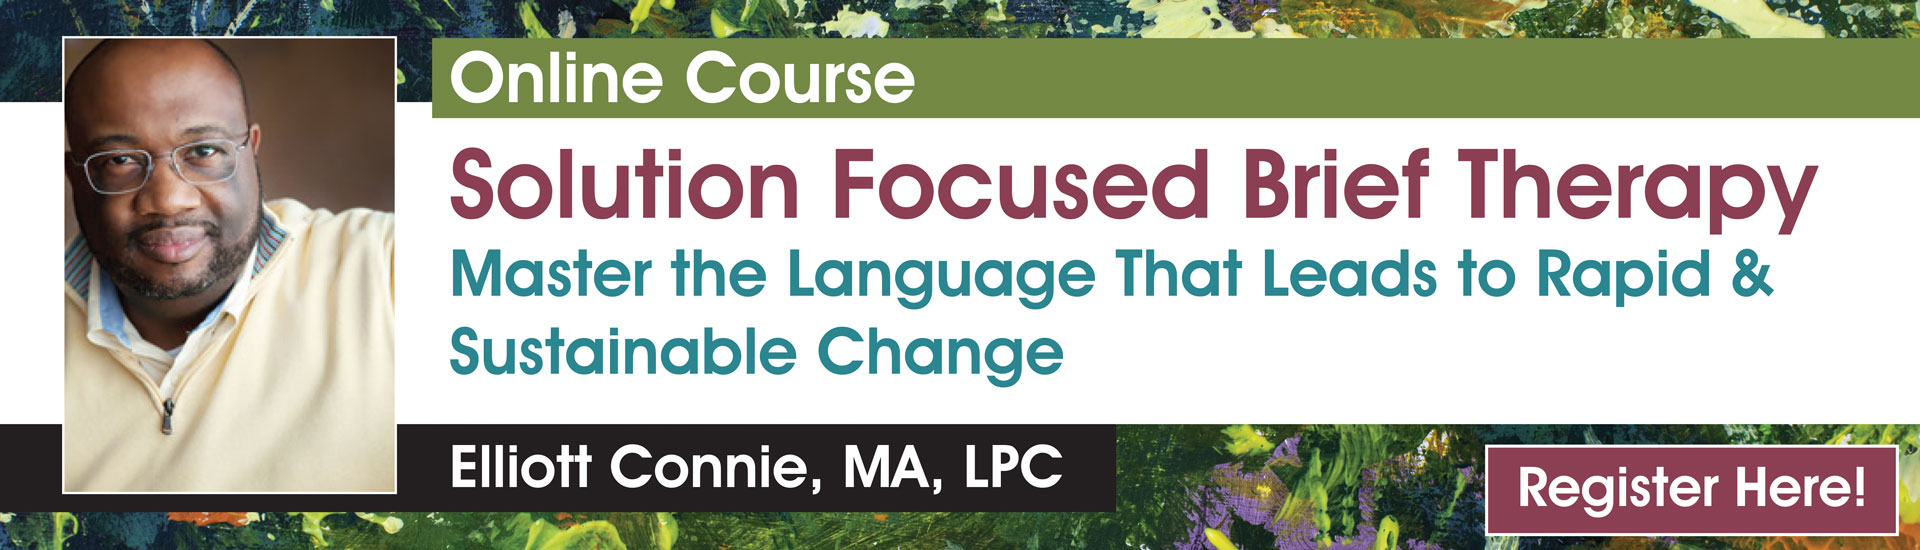 Solution Focused Brief Therapy: Master the Language that Leads to Rapid & Sustainable Change